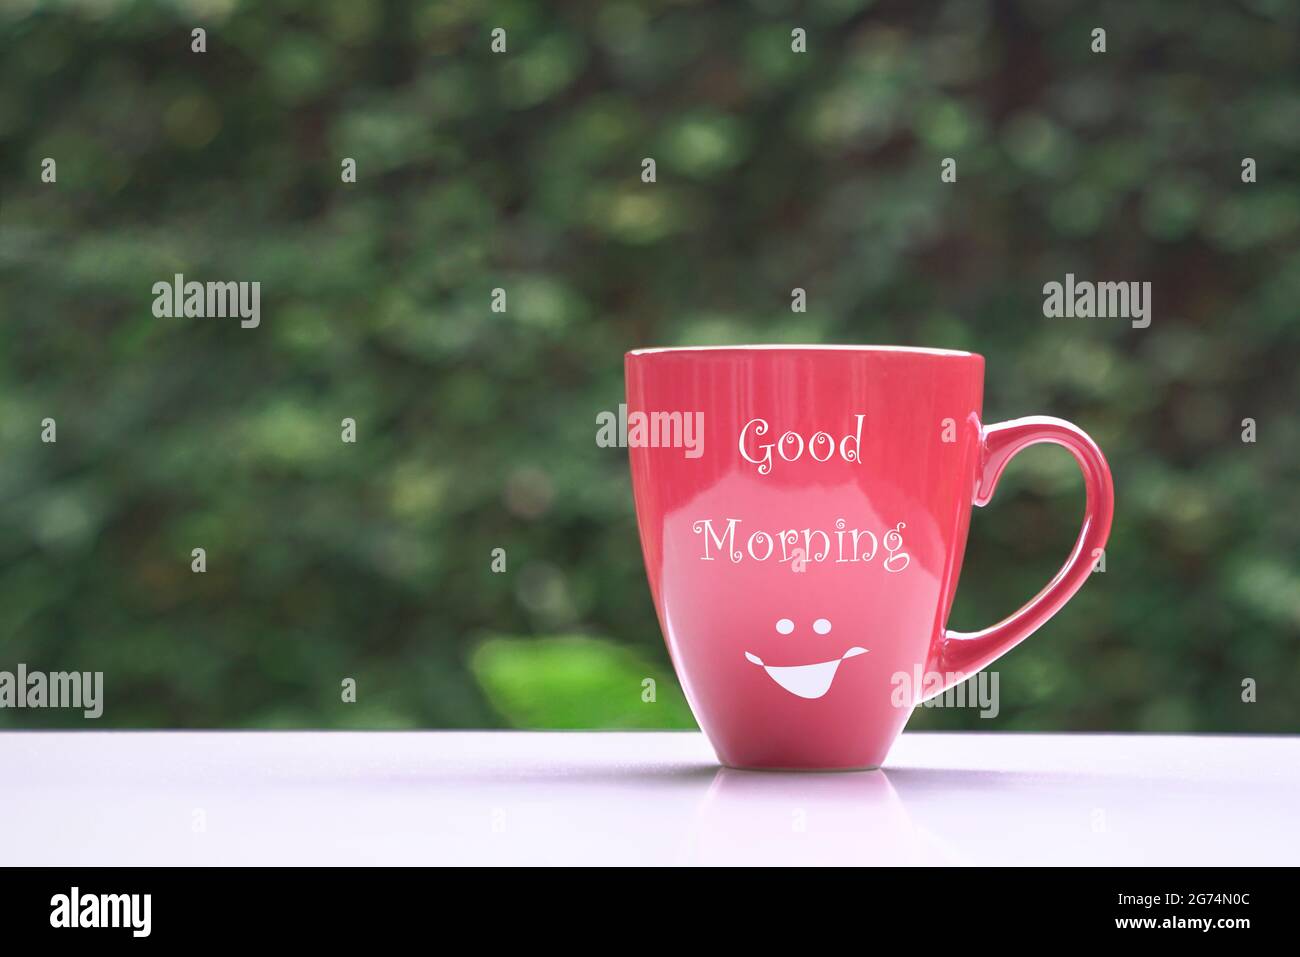 Good morning message on red coffee cup, on green nature background. Copy space. Stock Photo